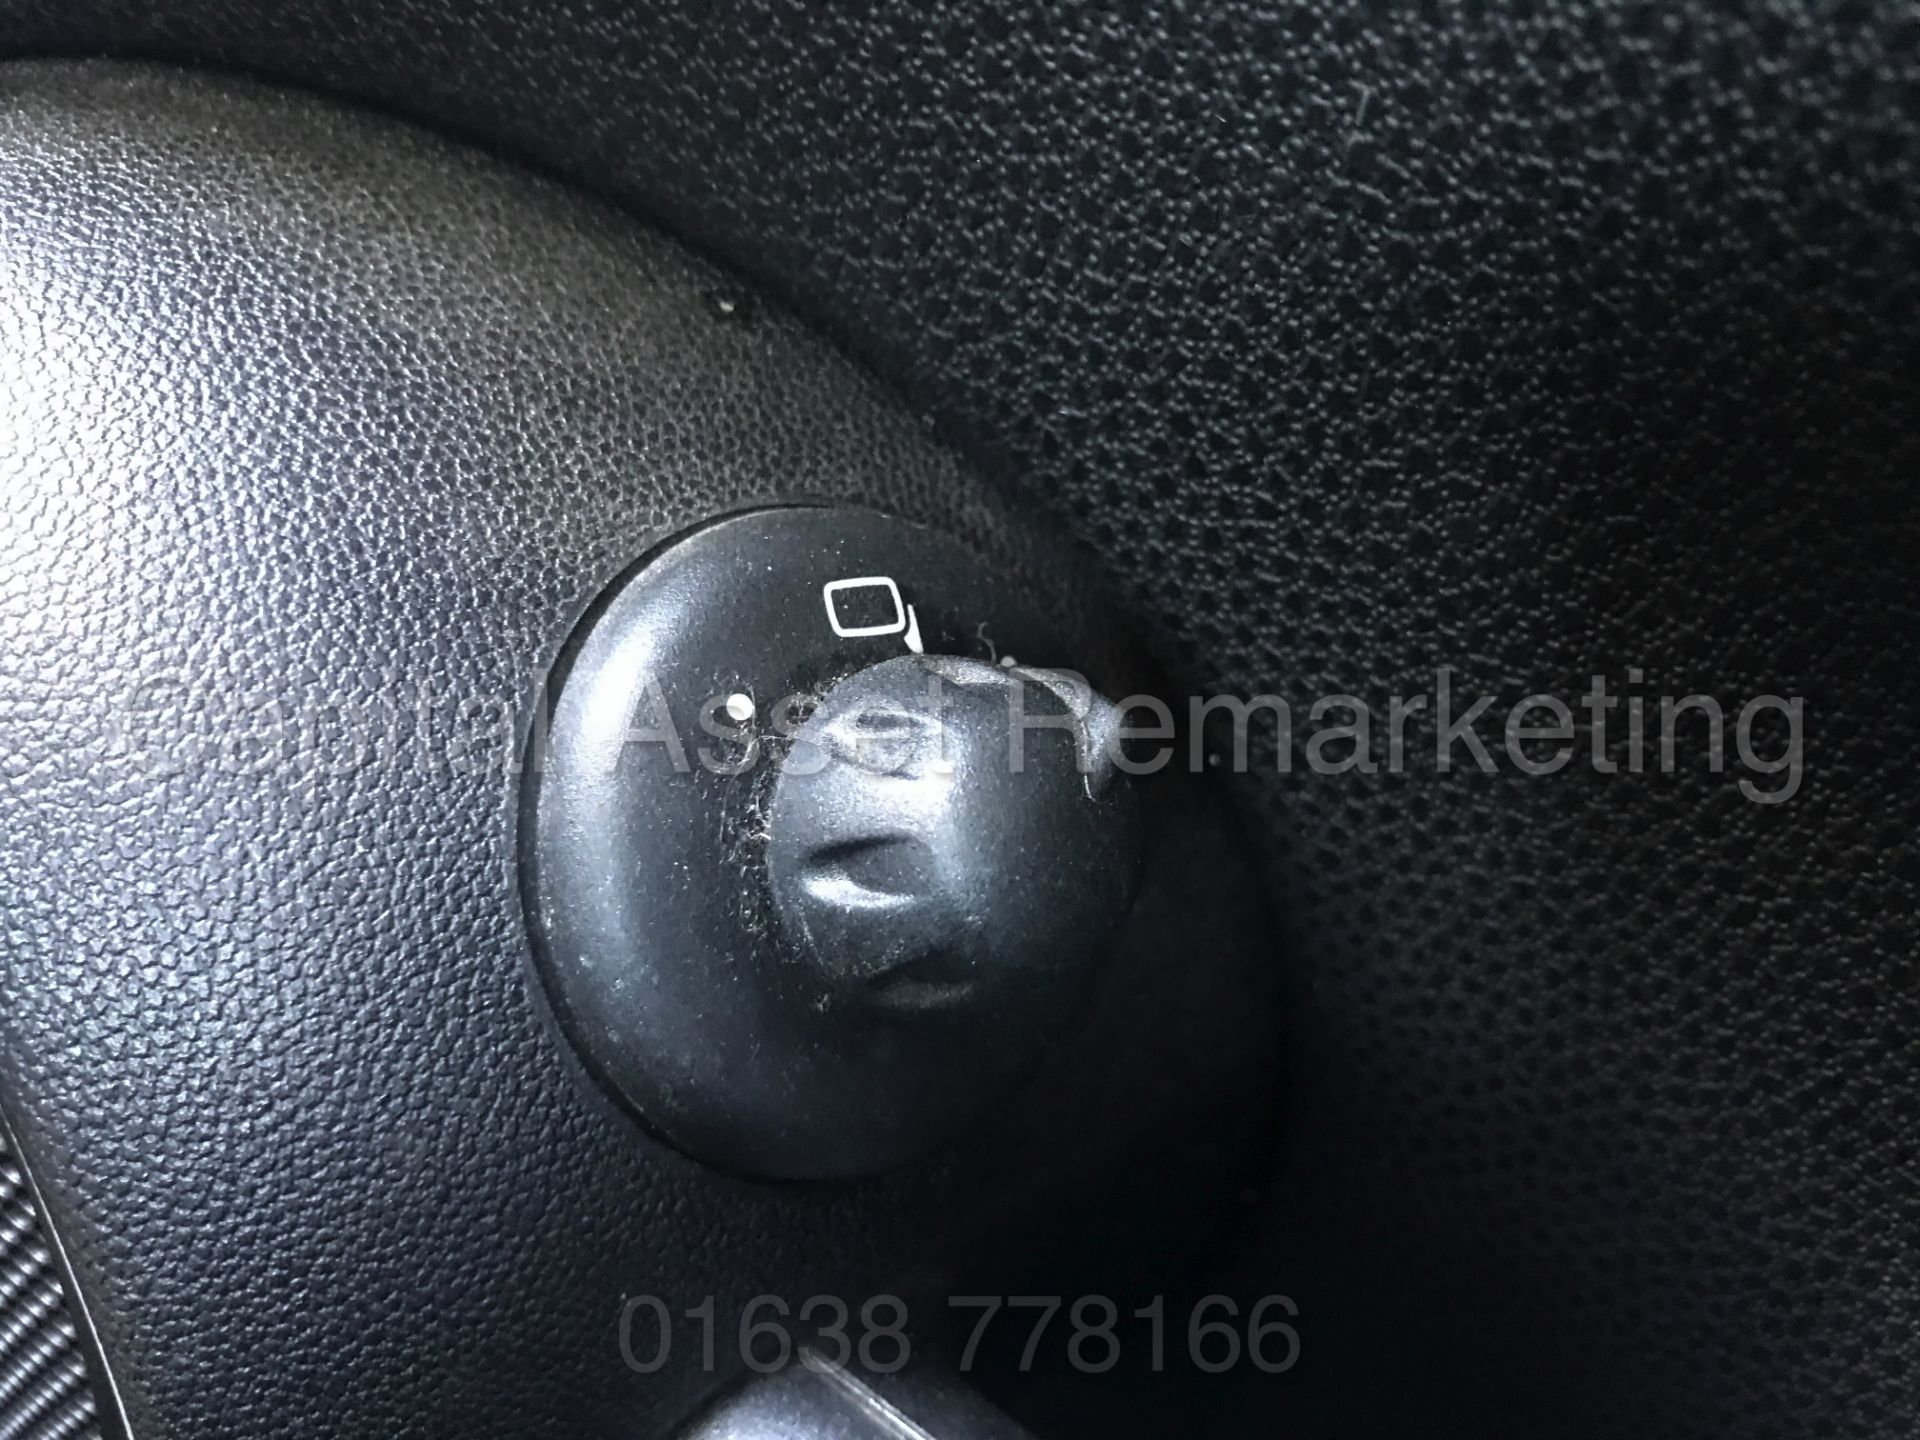 MINI COOPER D 'GRAPHITE EDITION' (2010) '1.6 DIESEL - 6 SPEED - LEATHER - STOP / START' (NO VAT) - Image 27 of 28